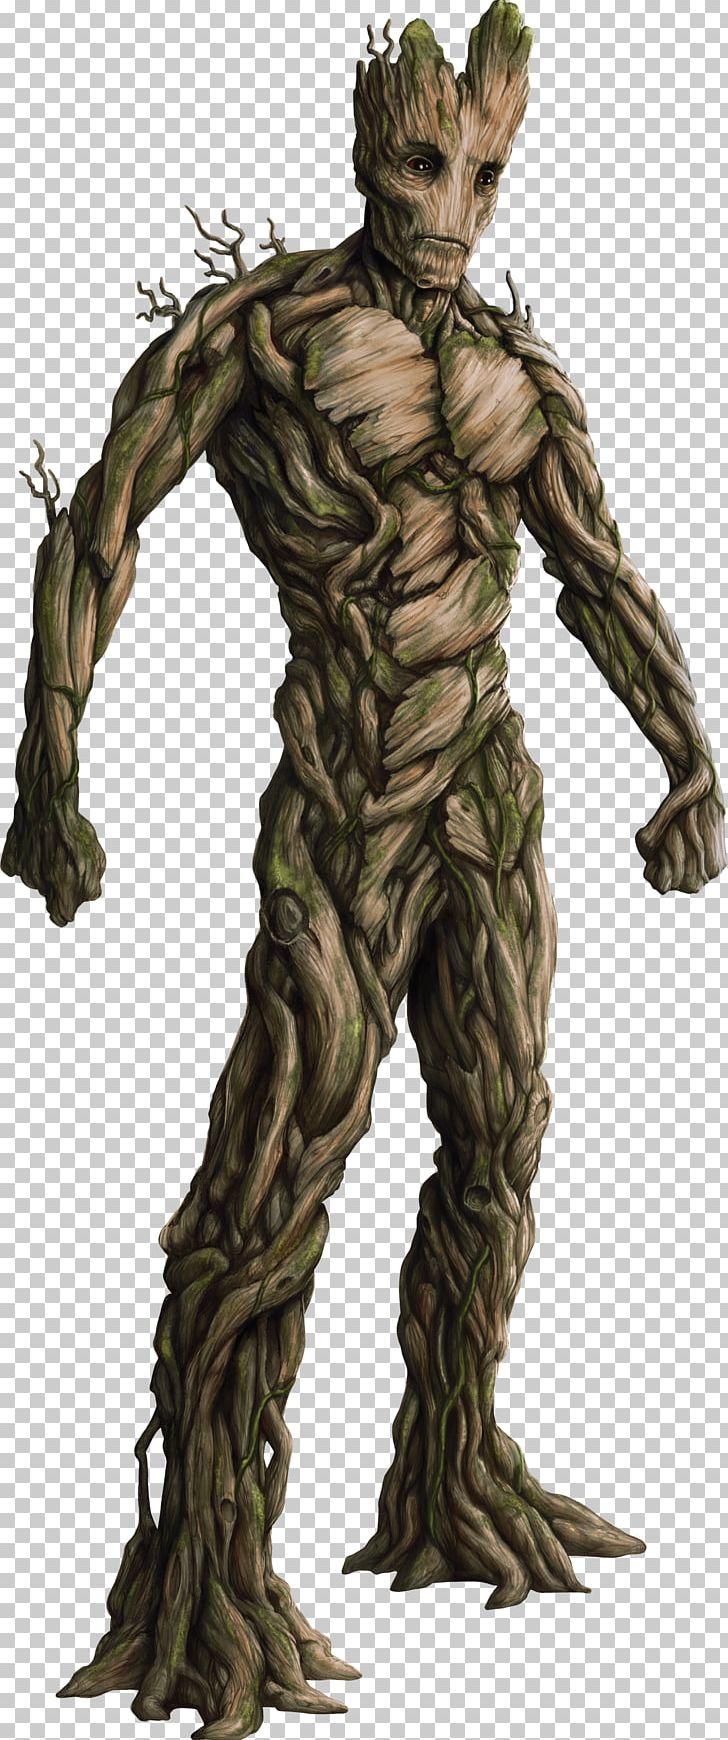 Groot Rocket Raccoon Star-Lord Drax The Destroyer Gamora PNG, Clipart, Art, Baby Groot, Classical Sculpture, Comics, Fictional Character Free PNG Download